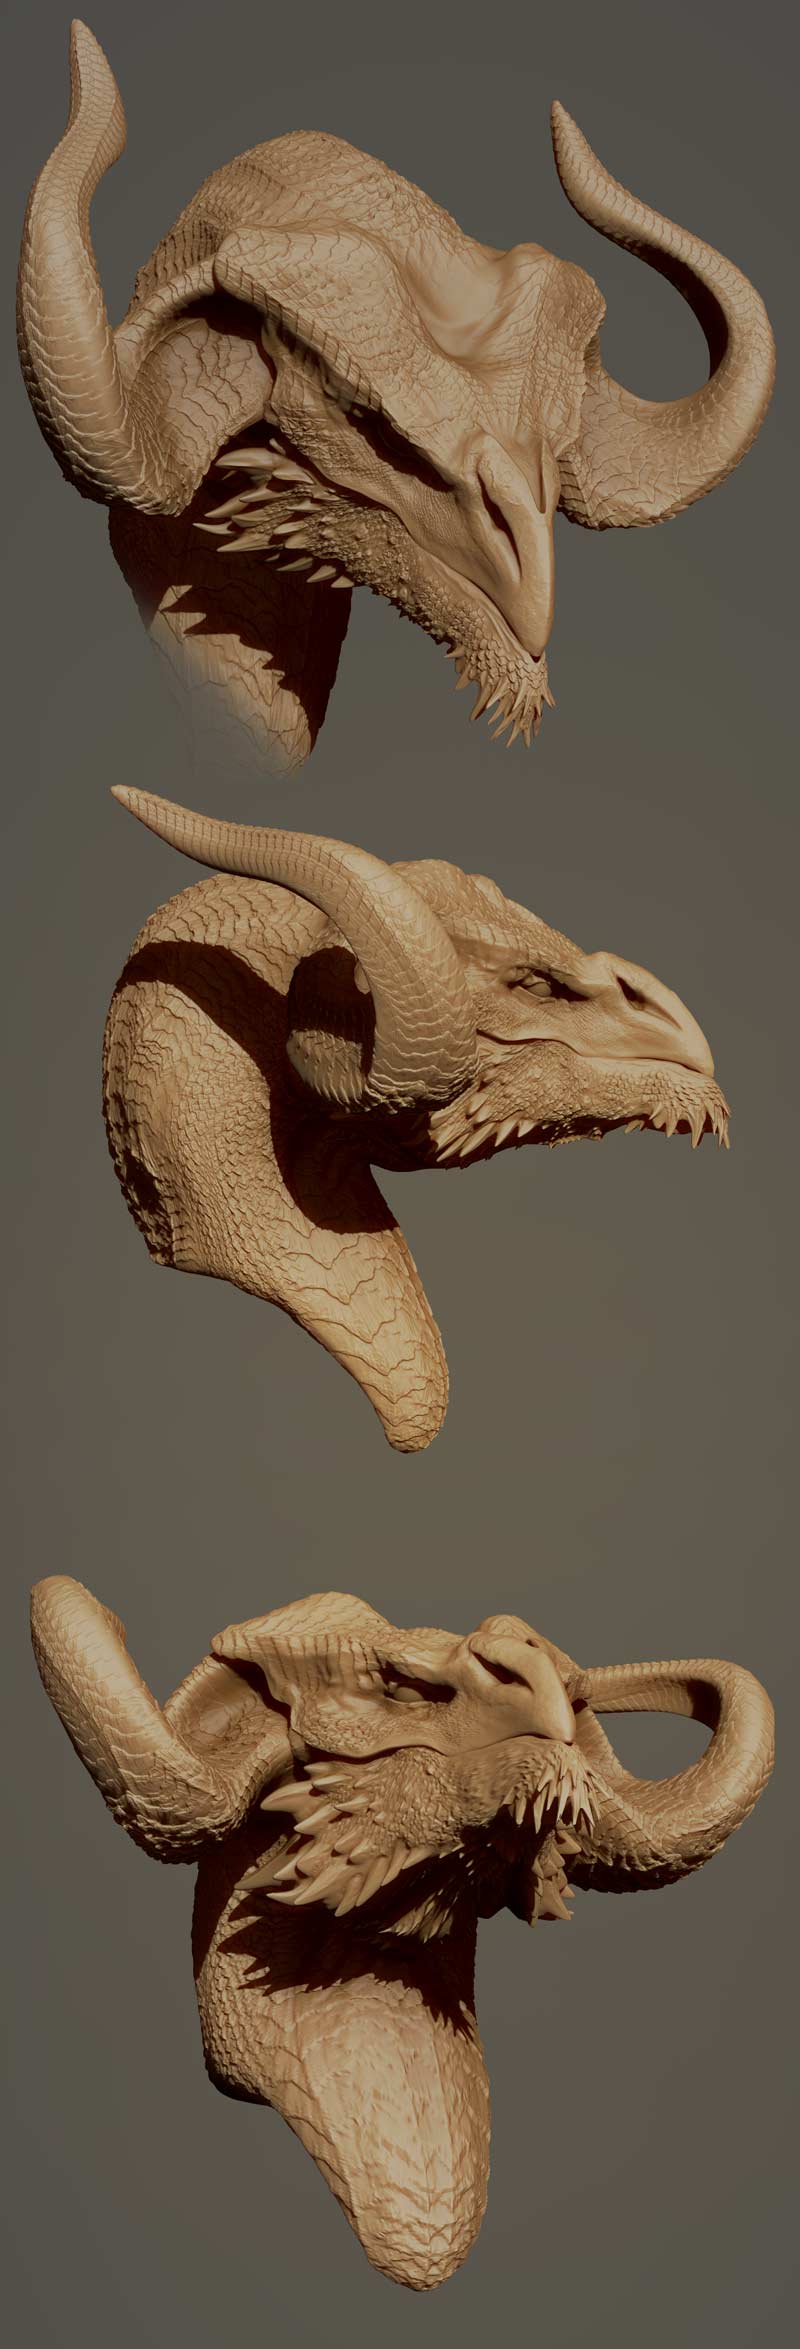 how_to_model_your_dragon_bust_xd_by_nebezial-d5lcx7u.jpg